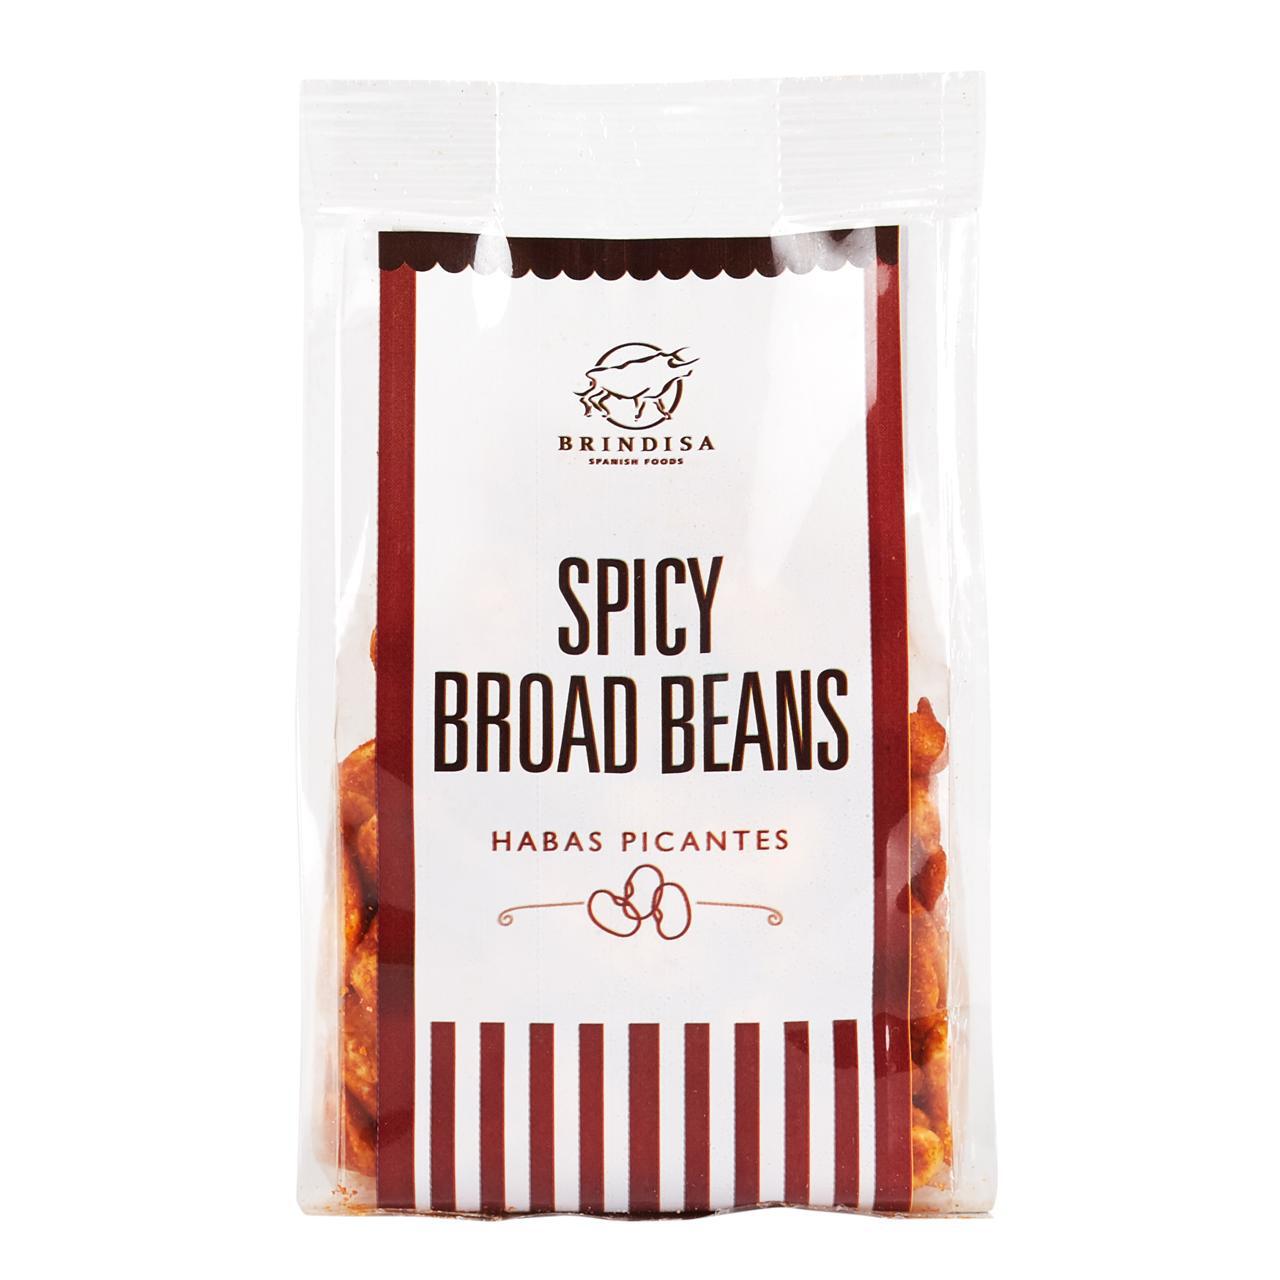 Brindisa Spanish Spicy Broad Beans Habas Picantes 100g